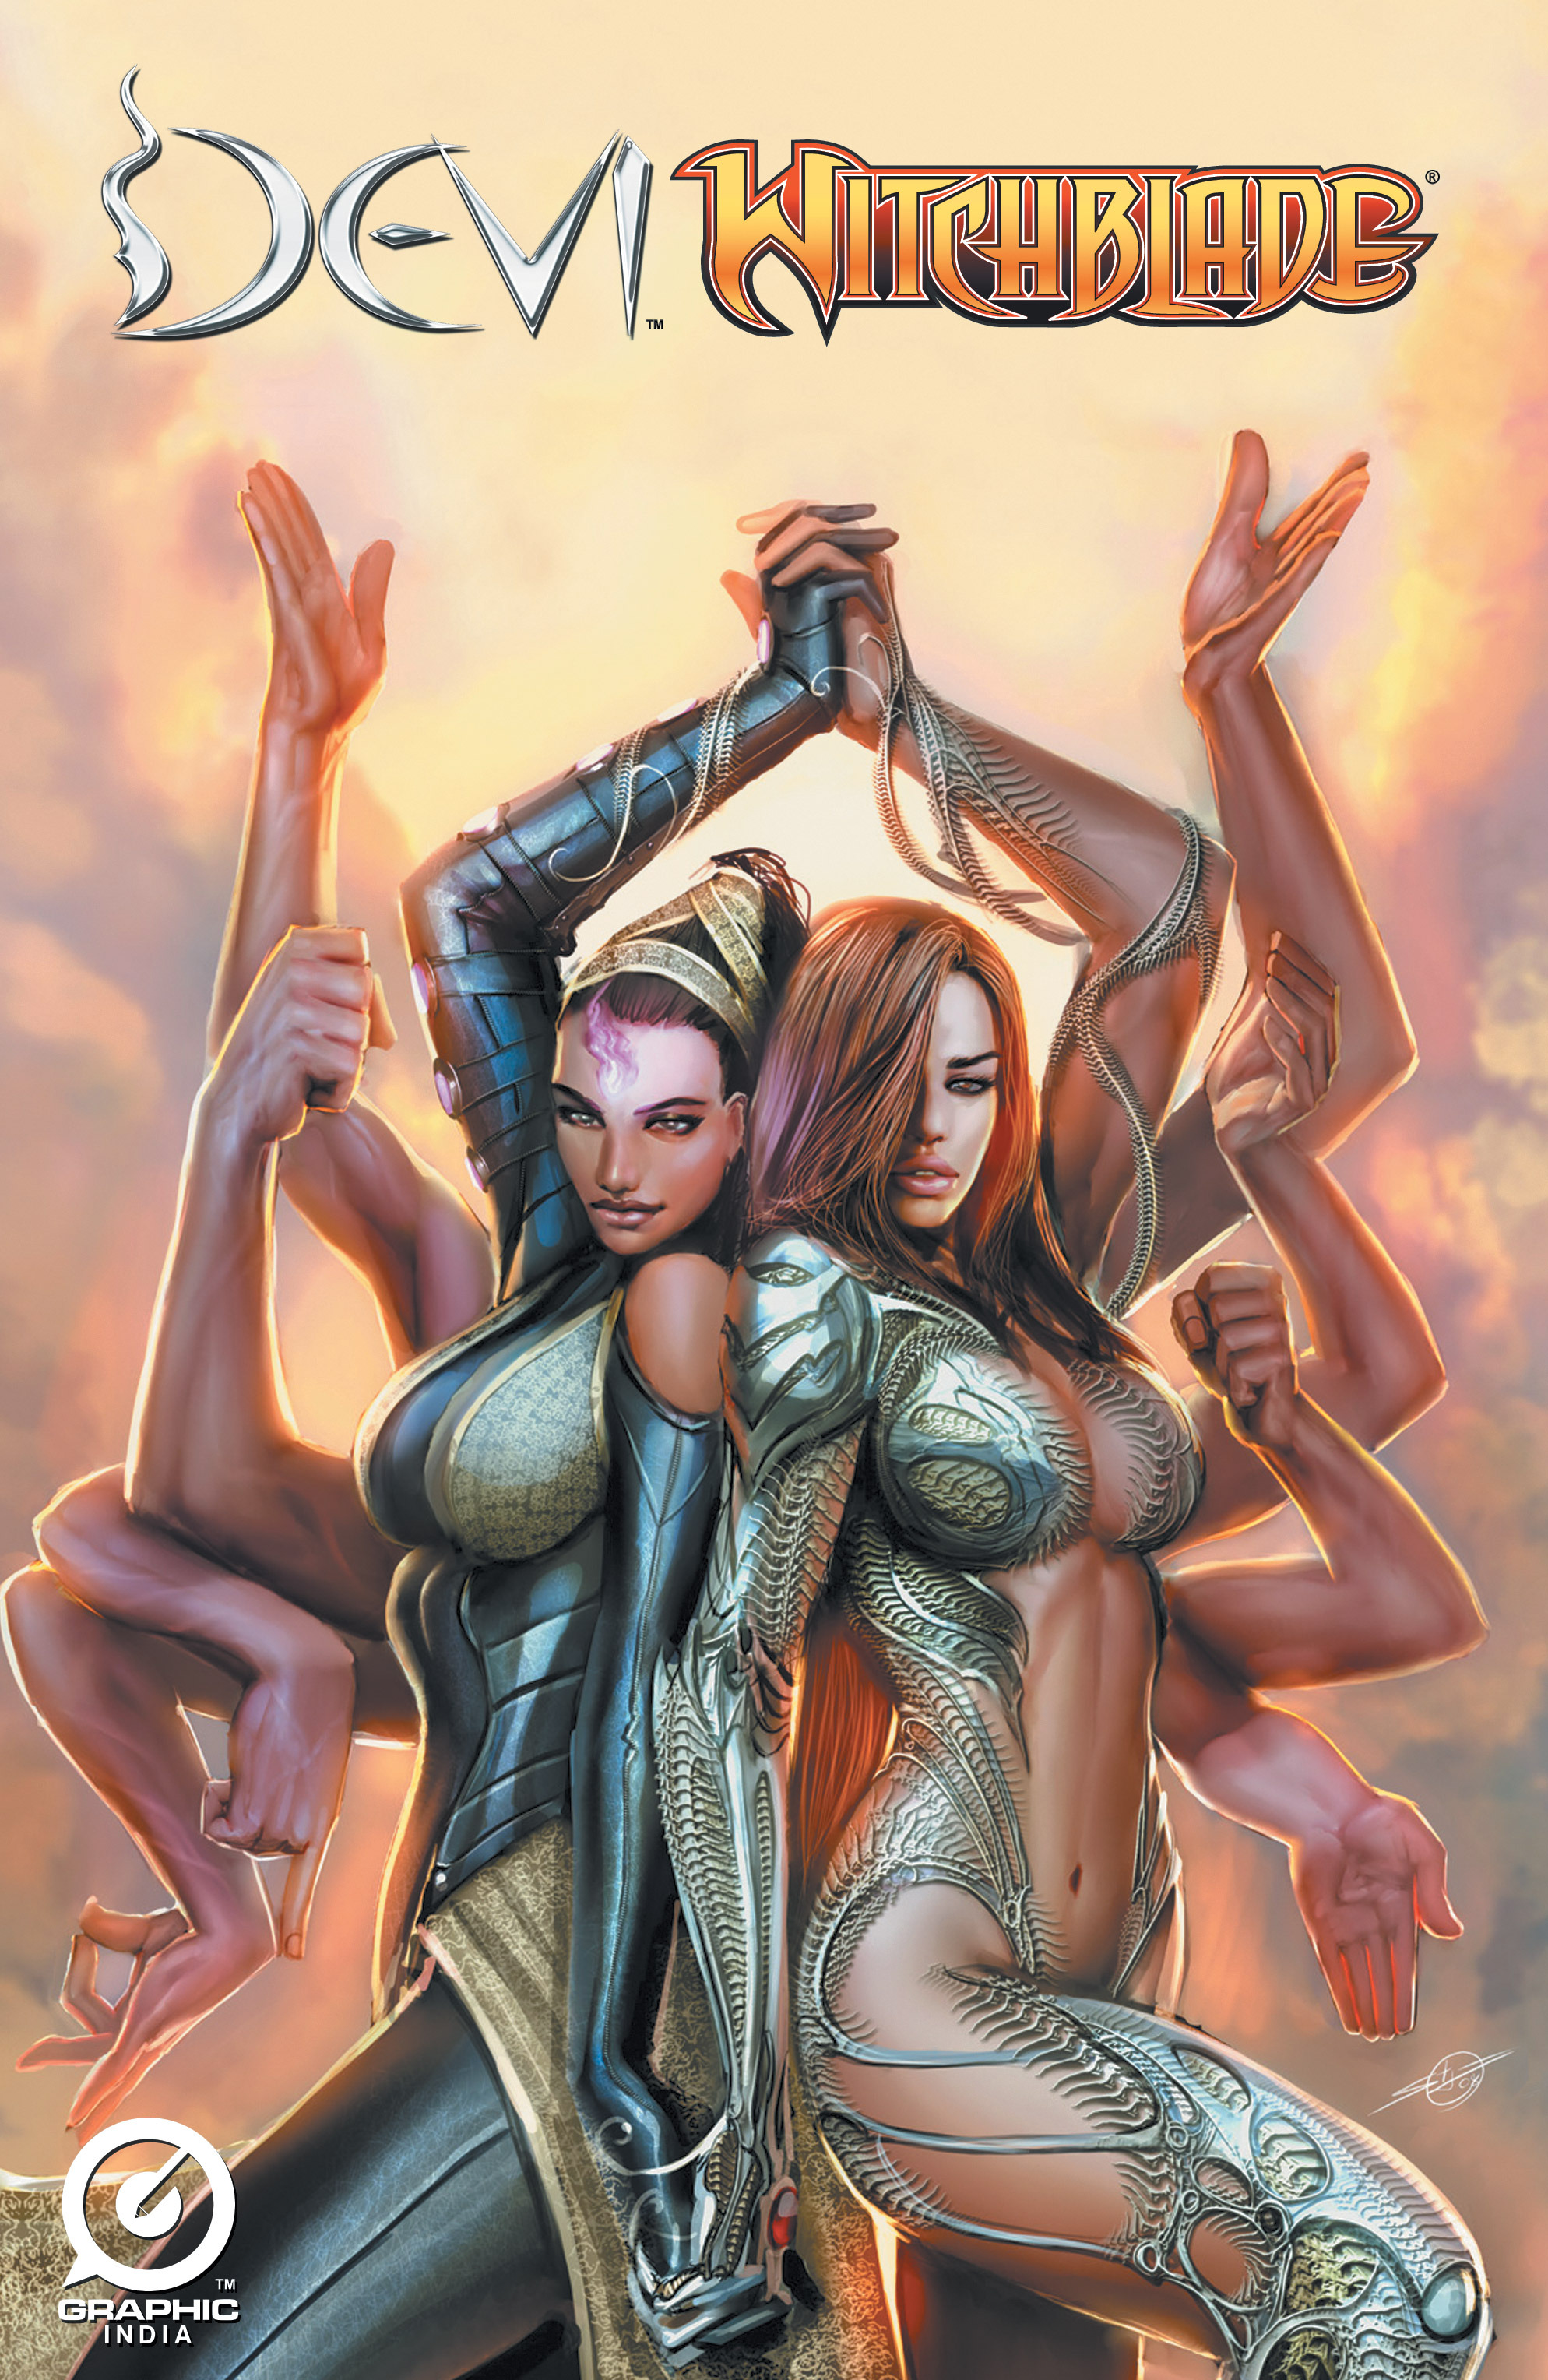 Devi Witchblade Full | Read Devi Witchblade Full comic online in high  quality. Read Full Comic online for free - Read comics online in high  quality .